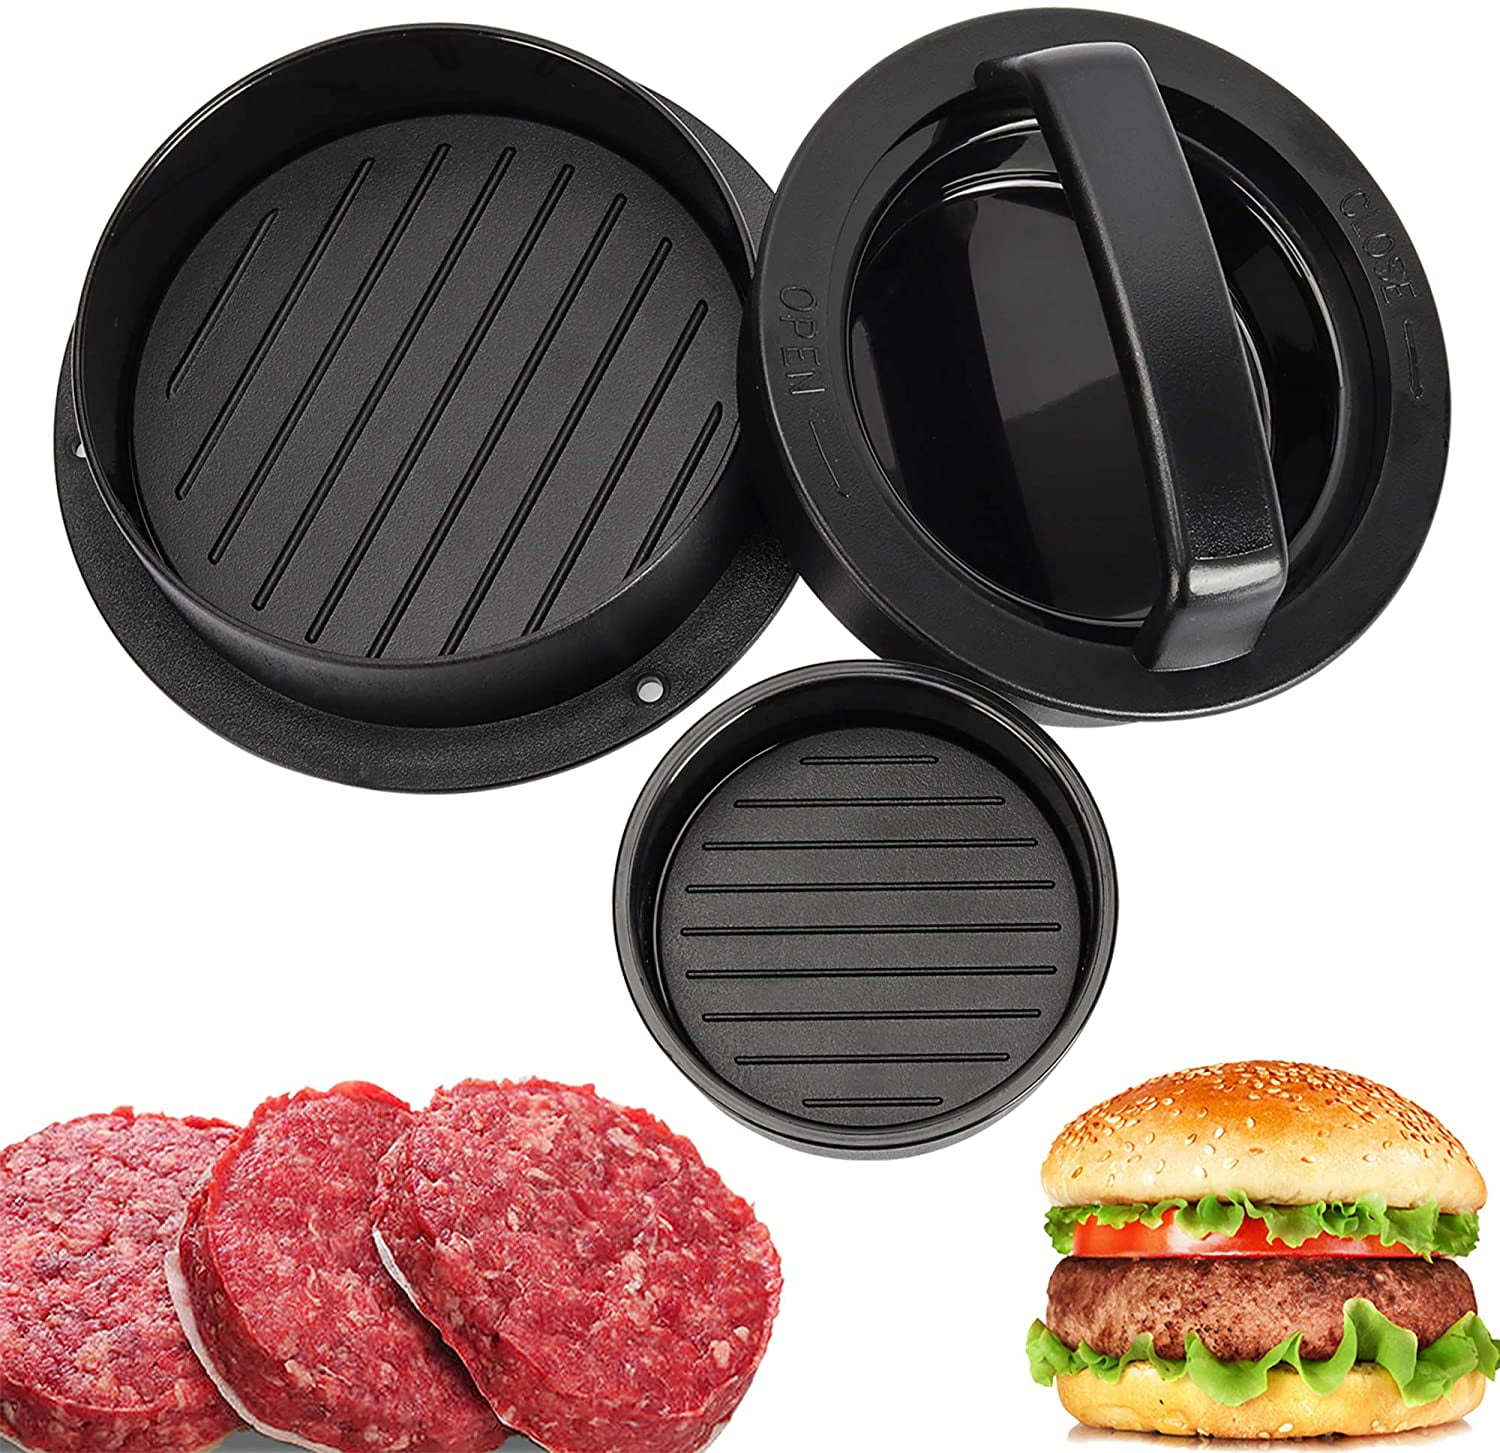 123 Life Burger Press Hamburger Patty Maker Different Size Patty Molds and Non Sticking Coating for Perfect Burgers Hamburgers Cheeseburgers Patties Meatballs